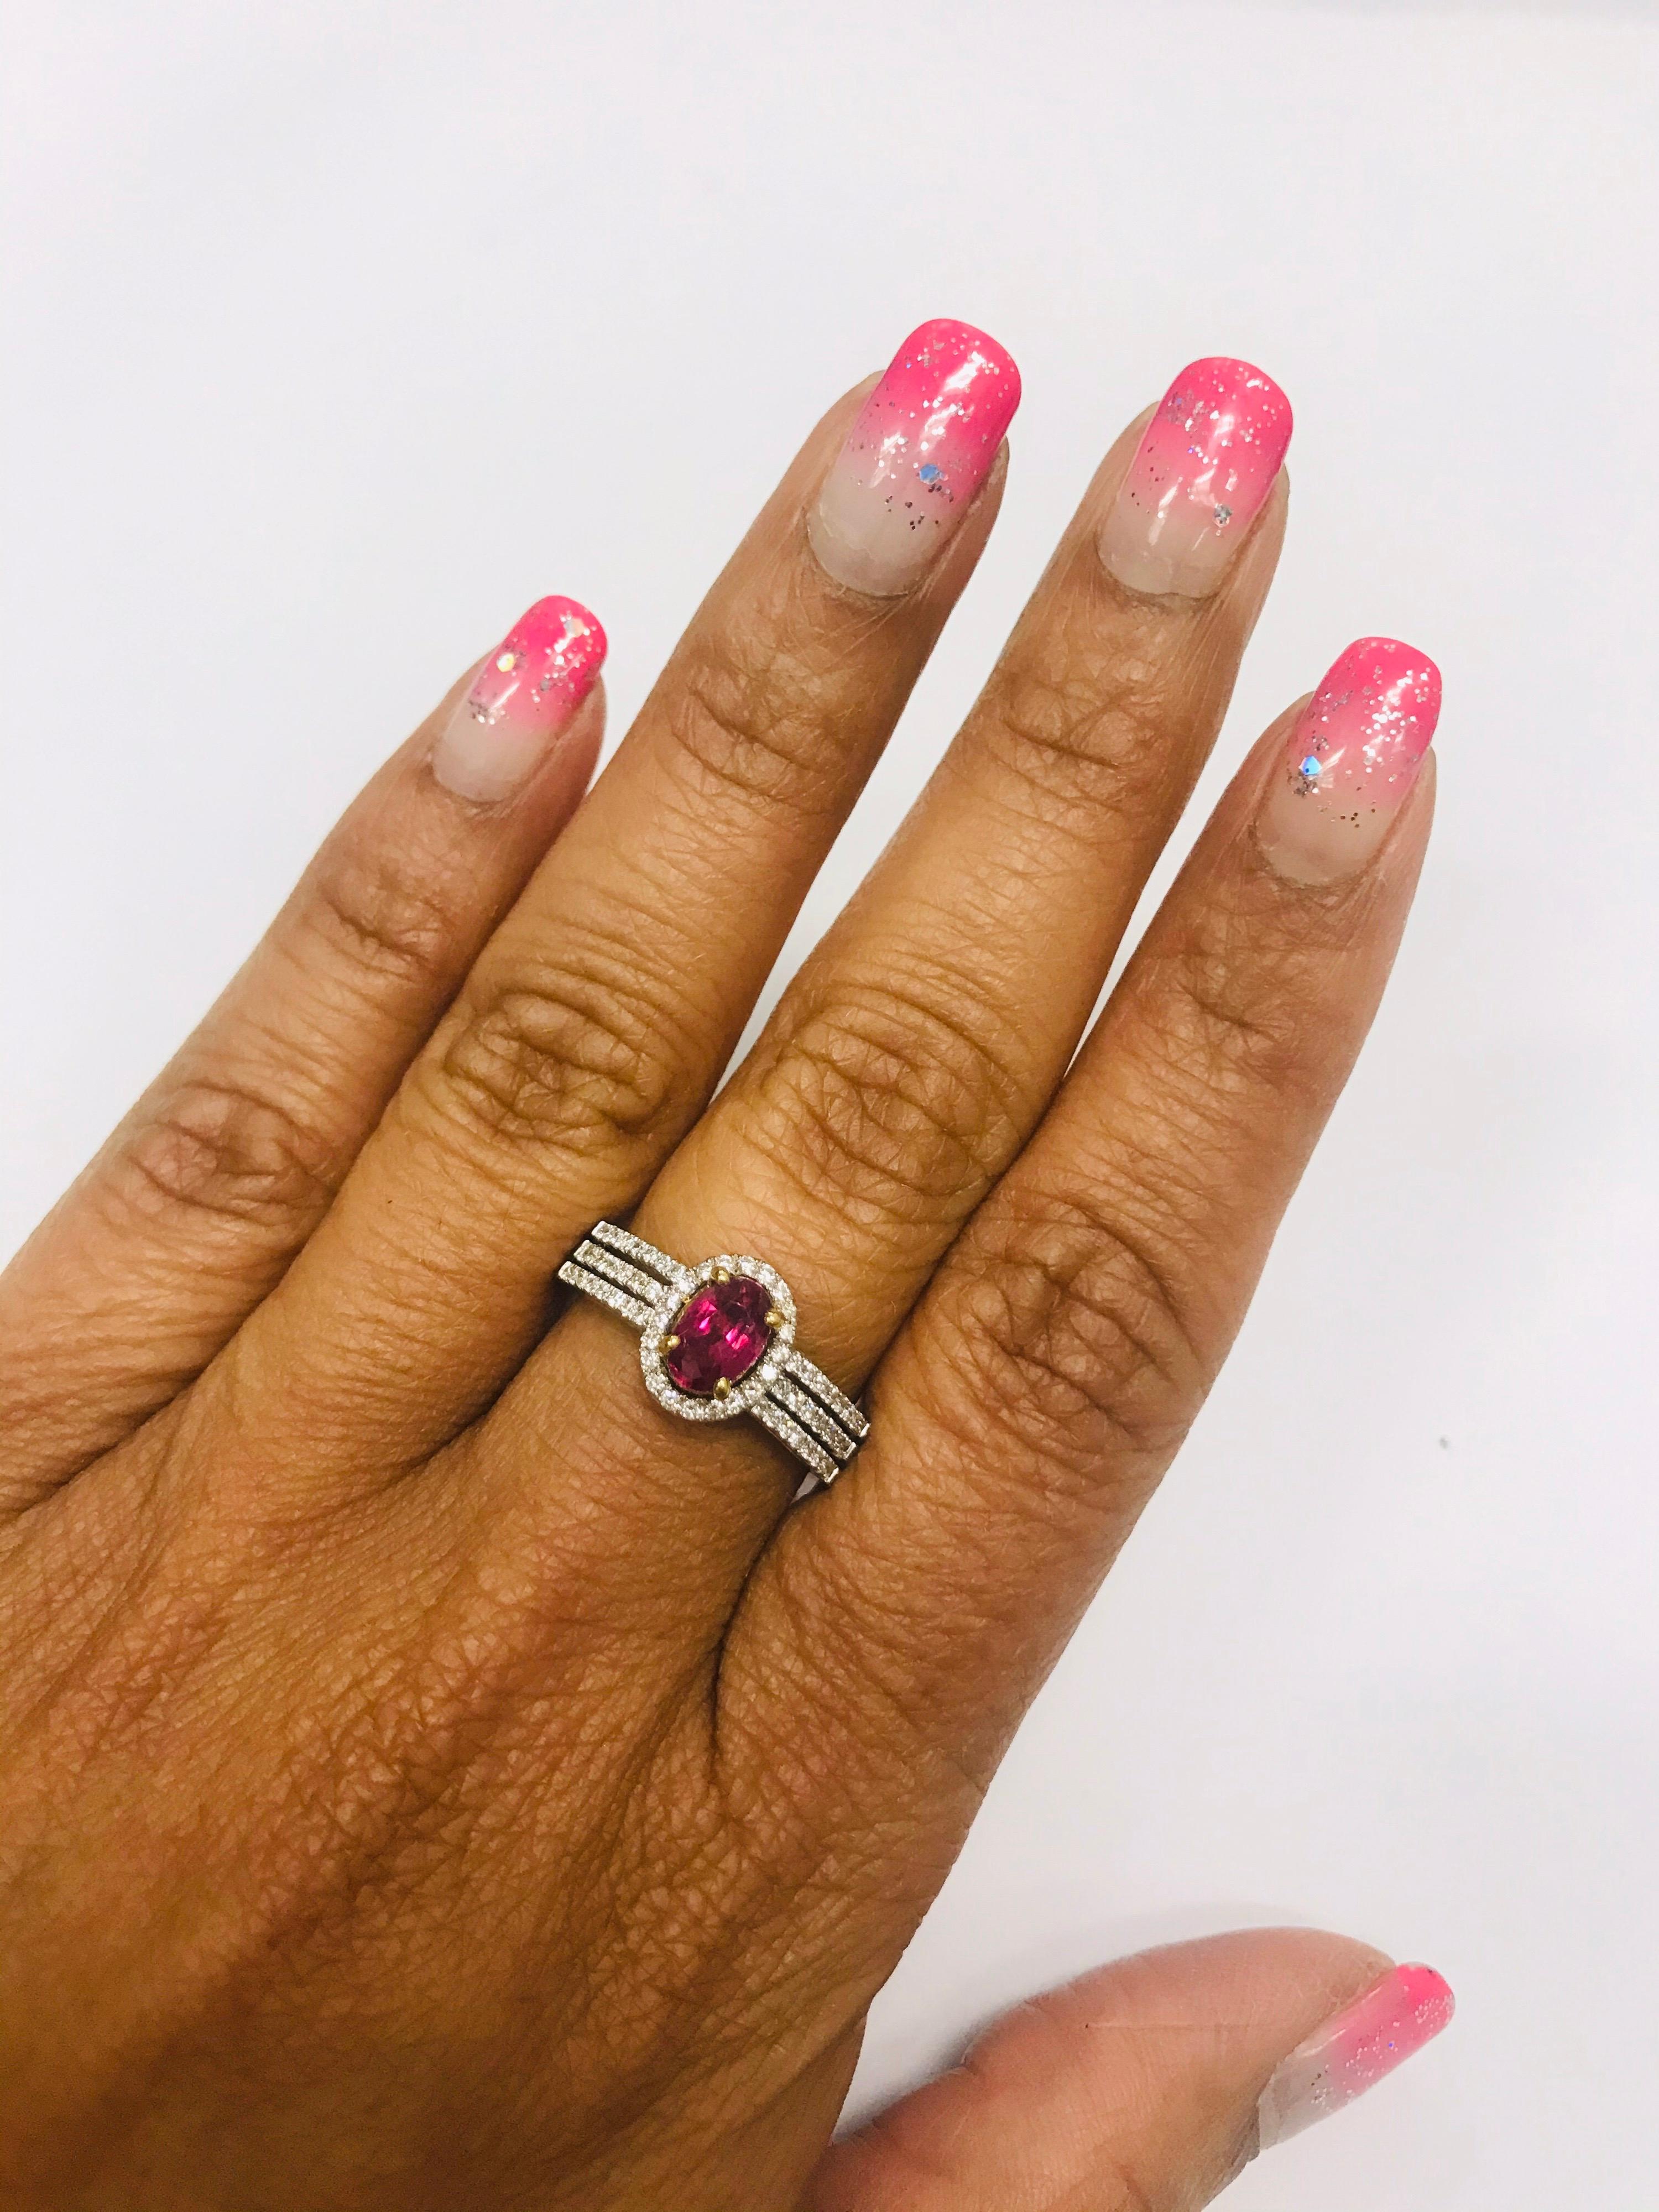 Contemporary 1.14 Carat Burmese Ruby Diamond 18K White Gold Engagement Ring For Sale